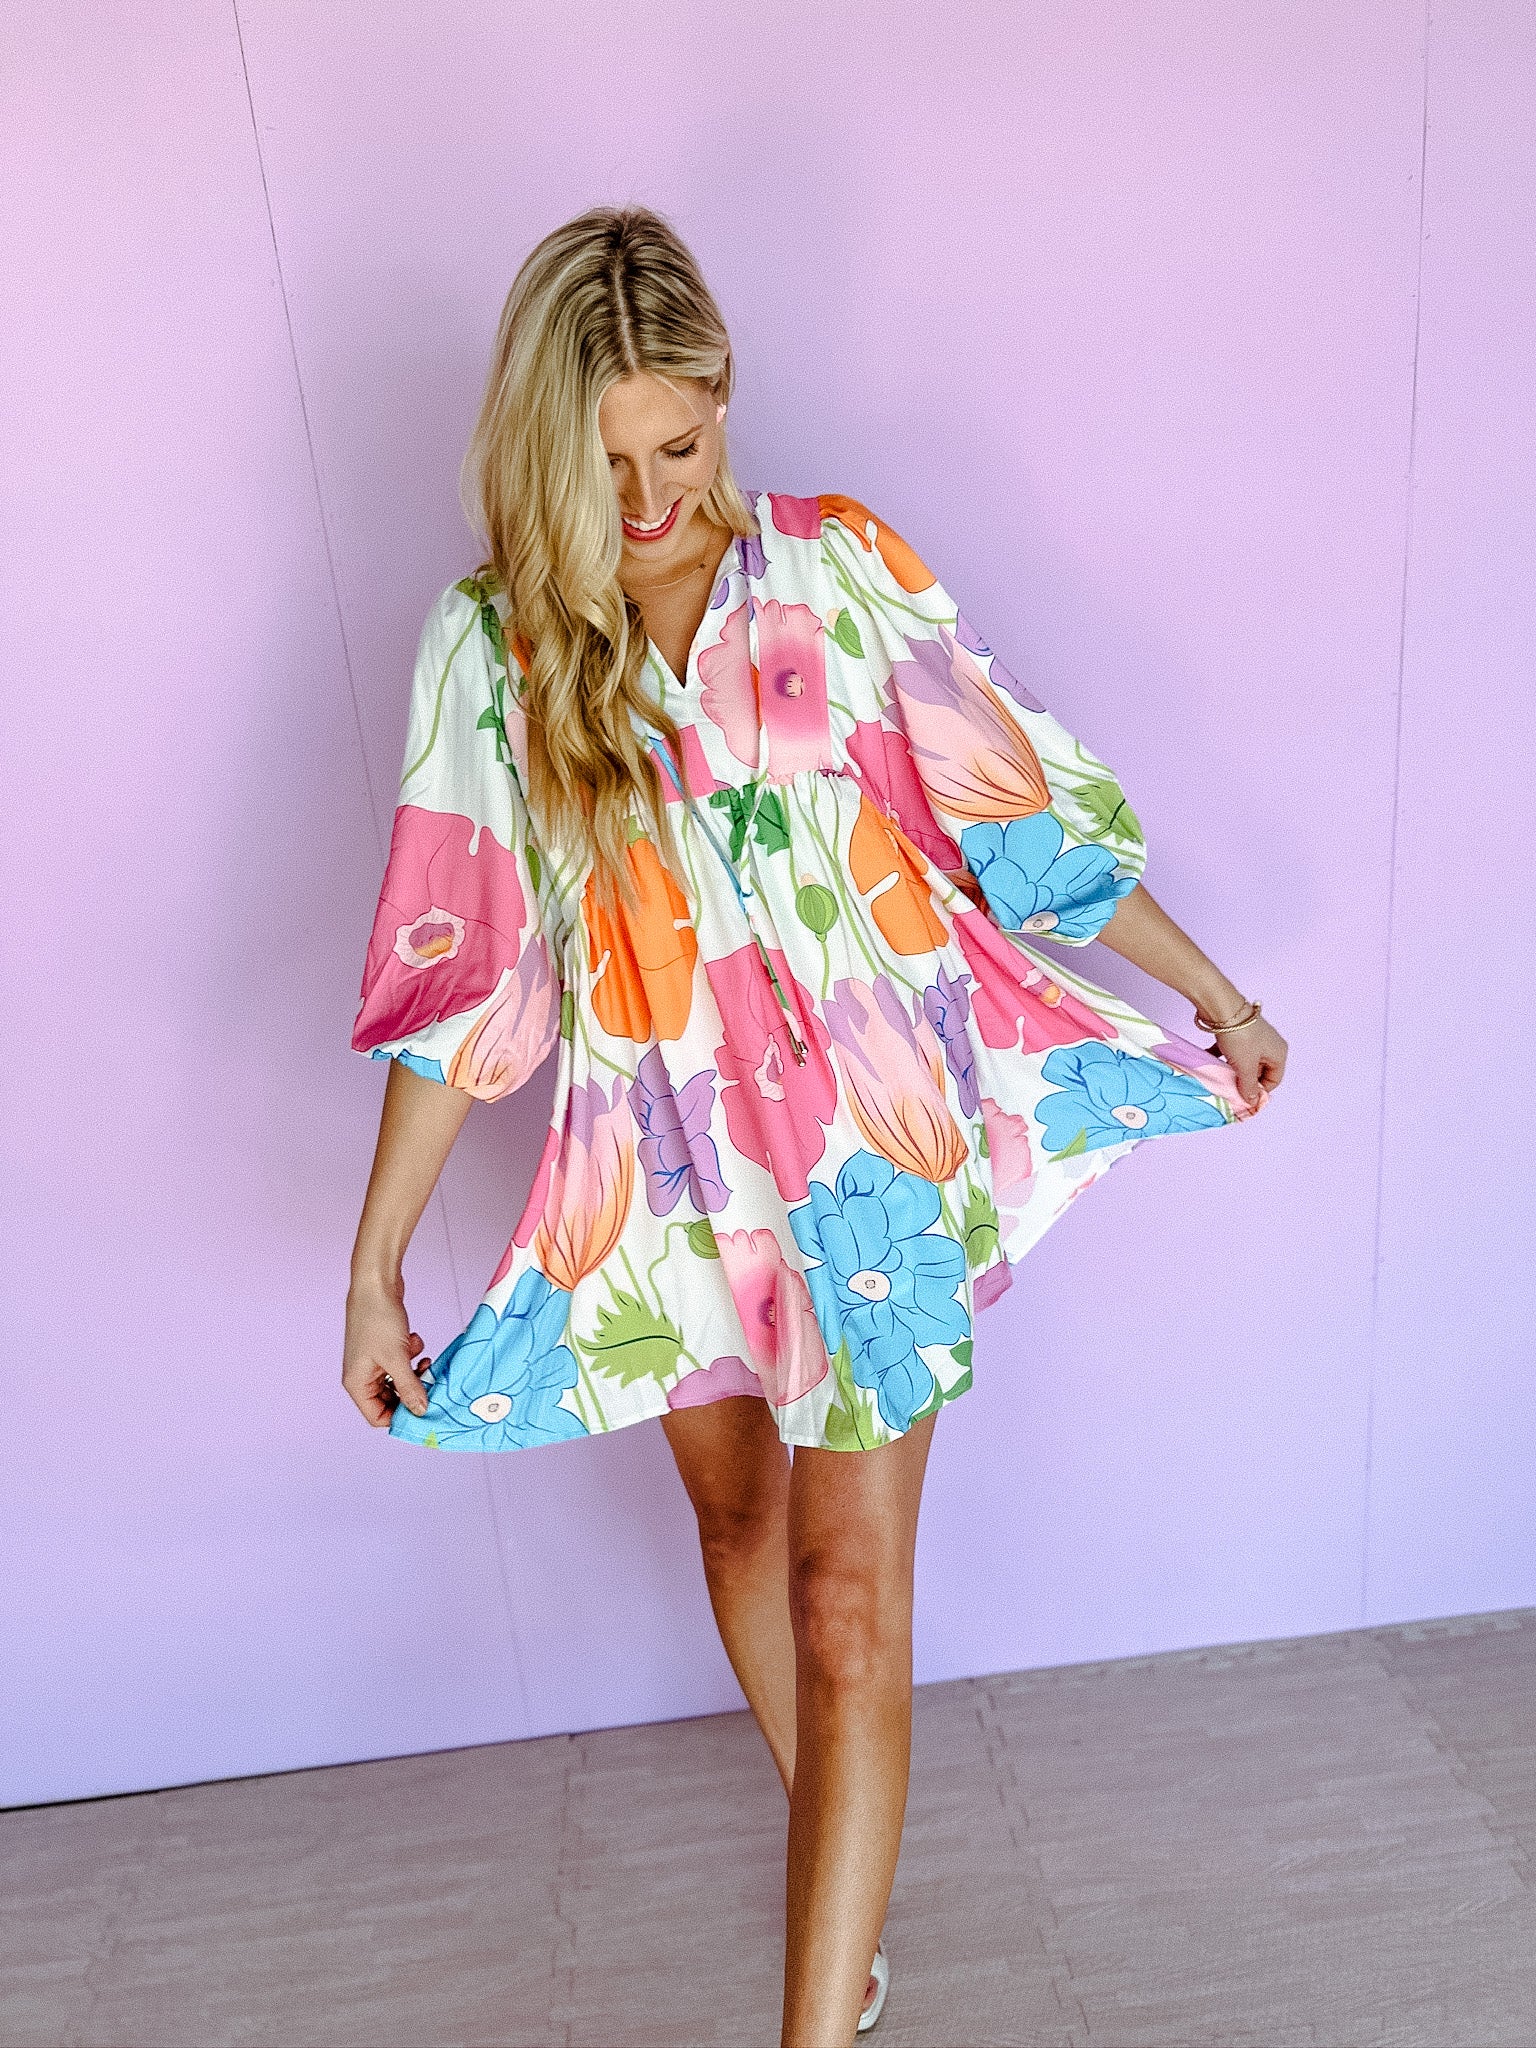 Belle Floral Mini Dress - Shocking Pink + Kerry Green + Soft White/Ivory